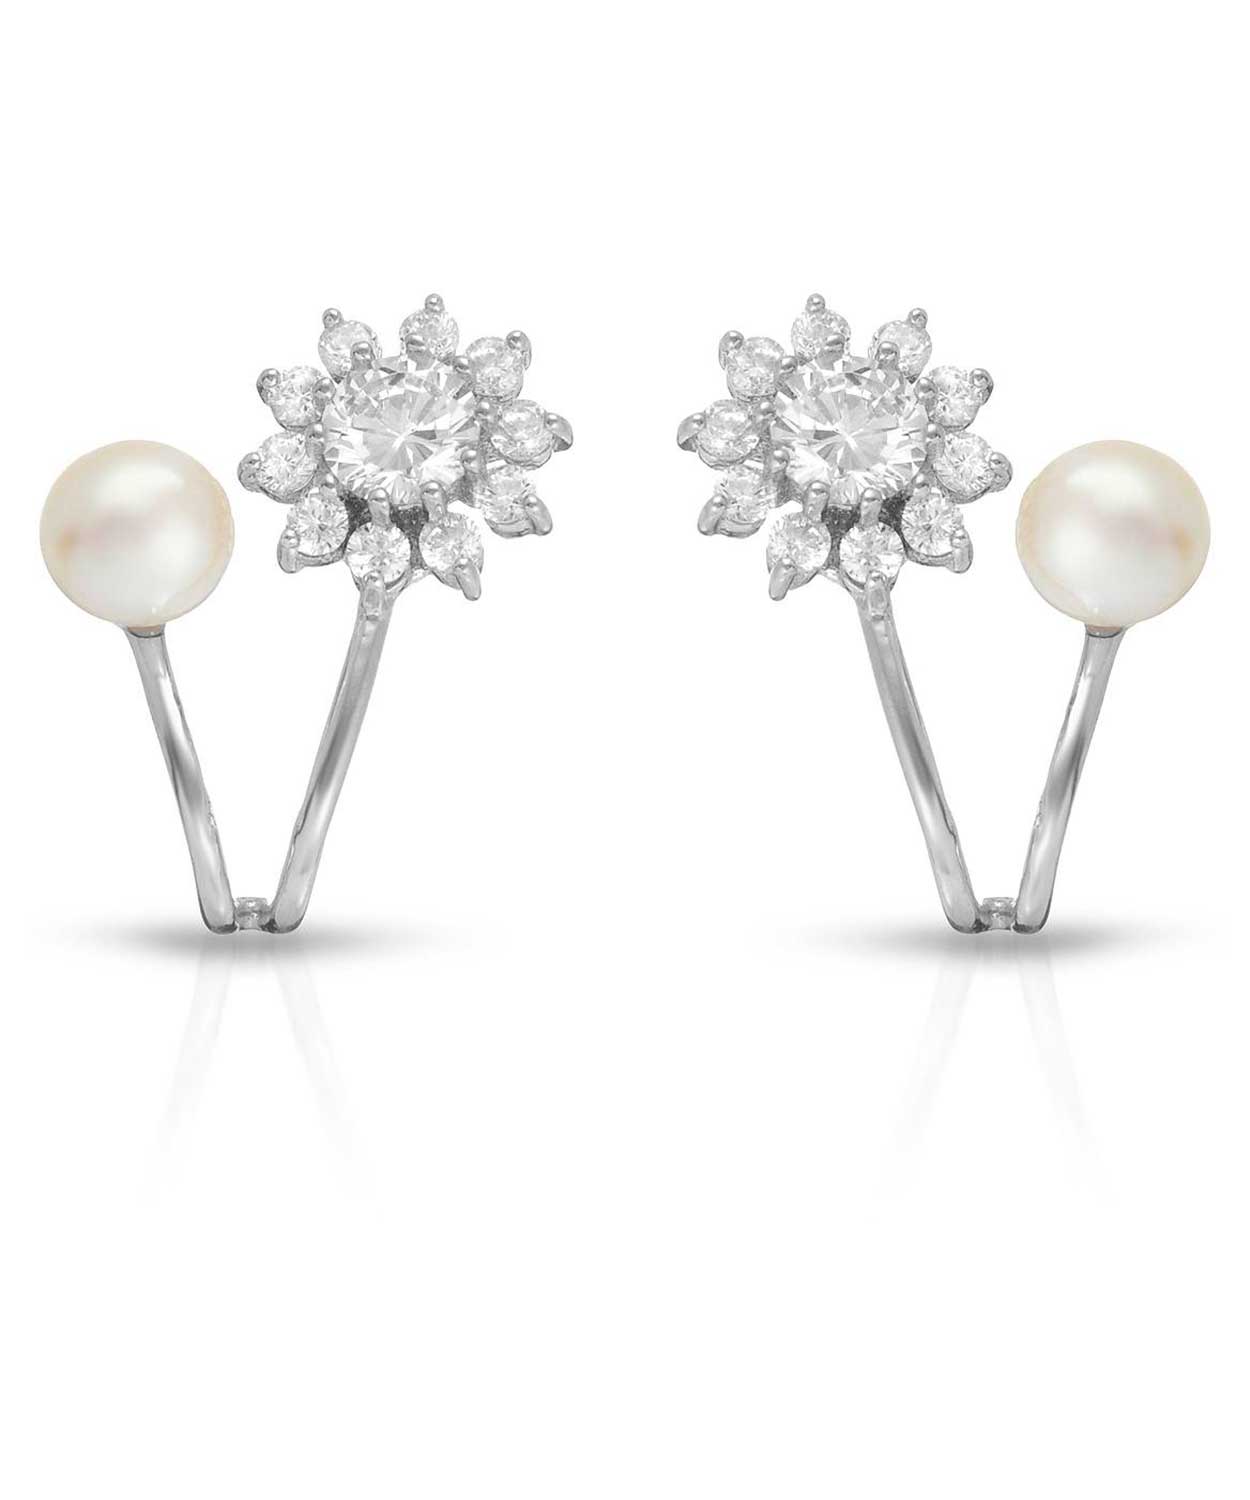 Brilliant Cut Cubic Zirconia and Freshwater Pearl 925 Sterling Silver Flower Earrings View 1